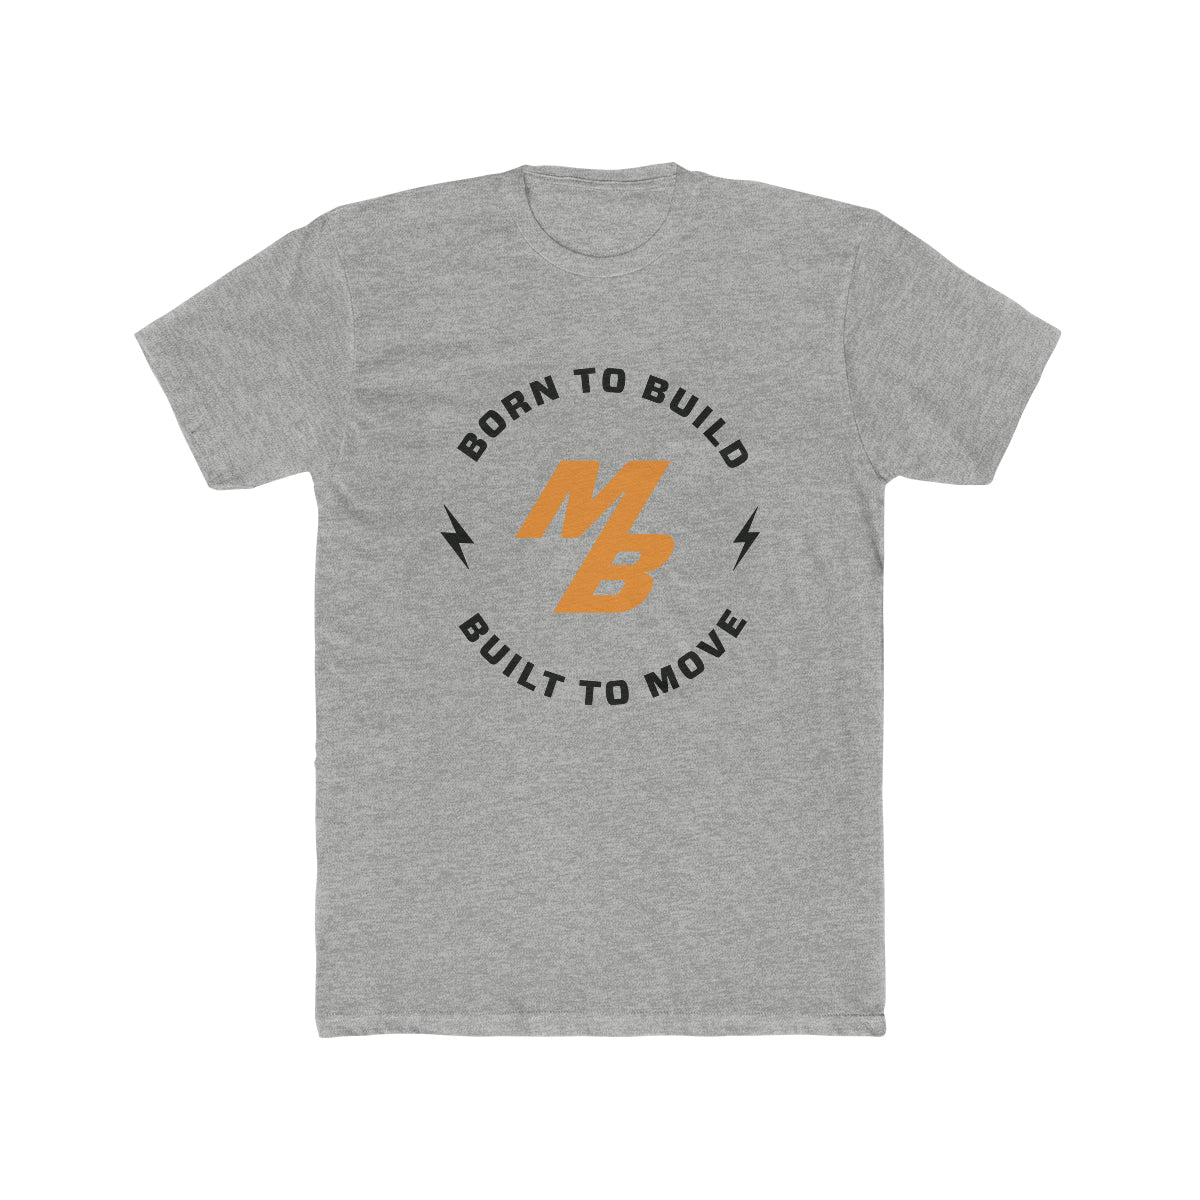 Born to Build Move Bumpers T-shirt- Heather Gray